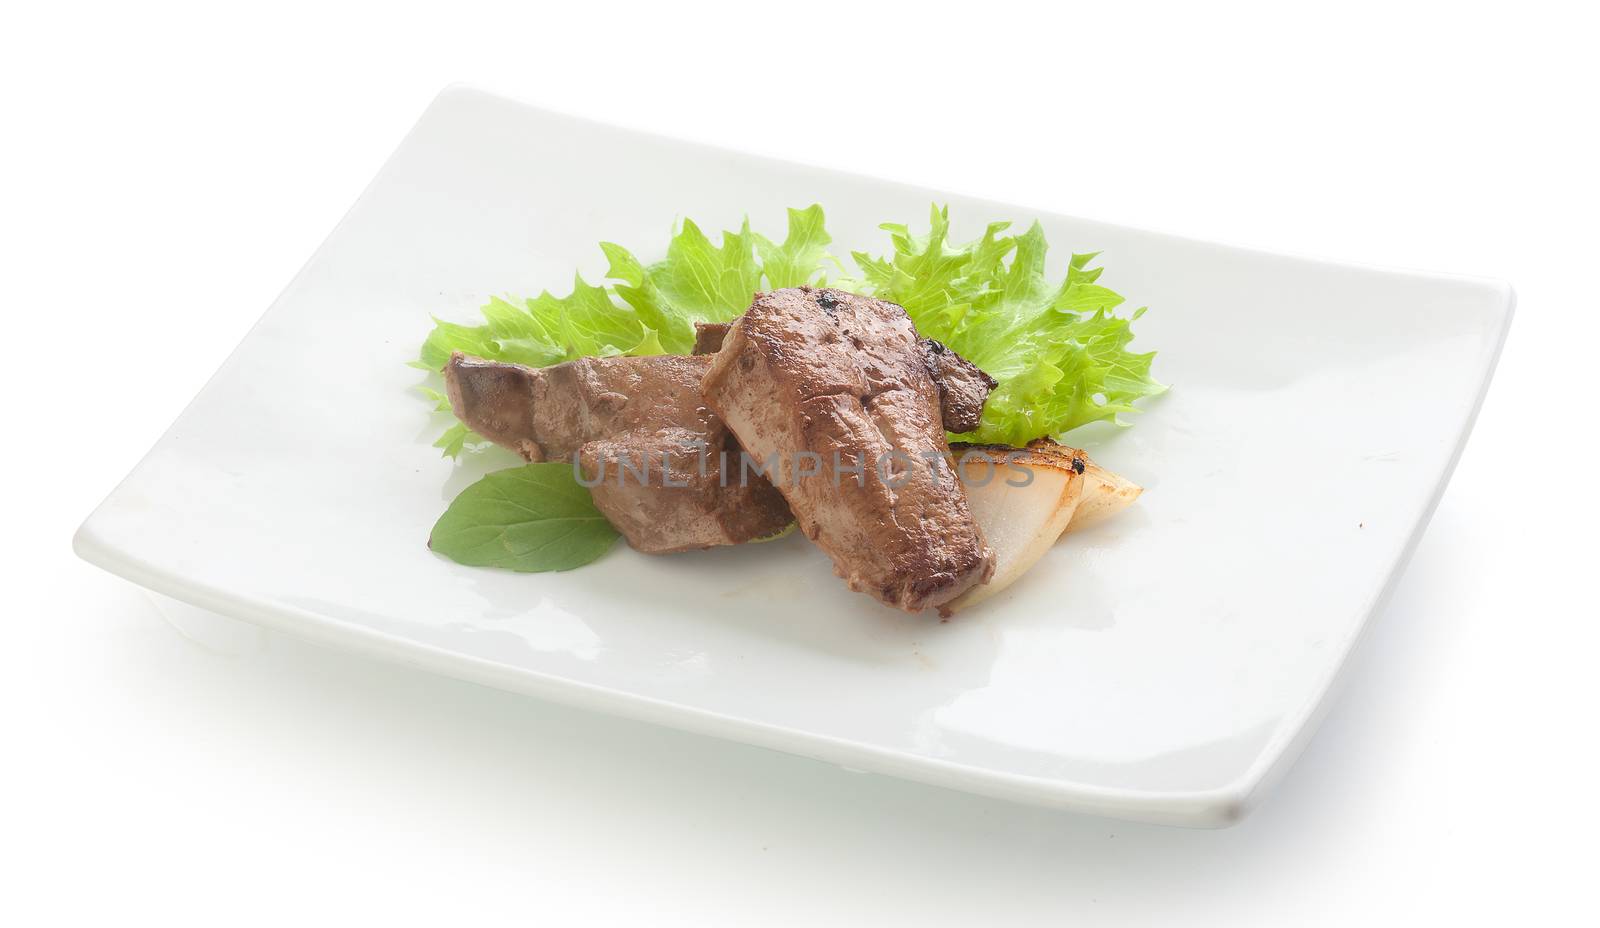 Fried beef liver by Angorius